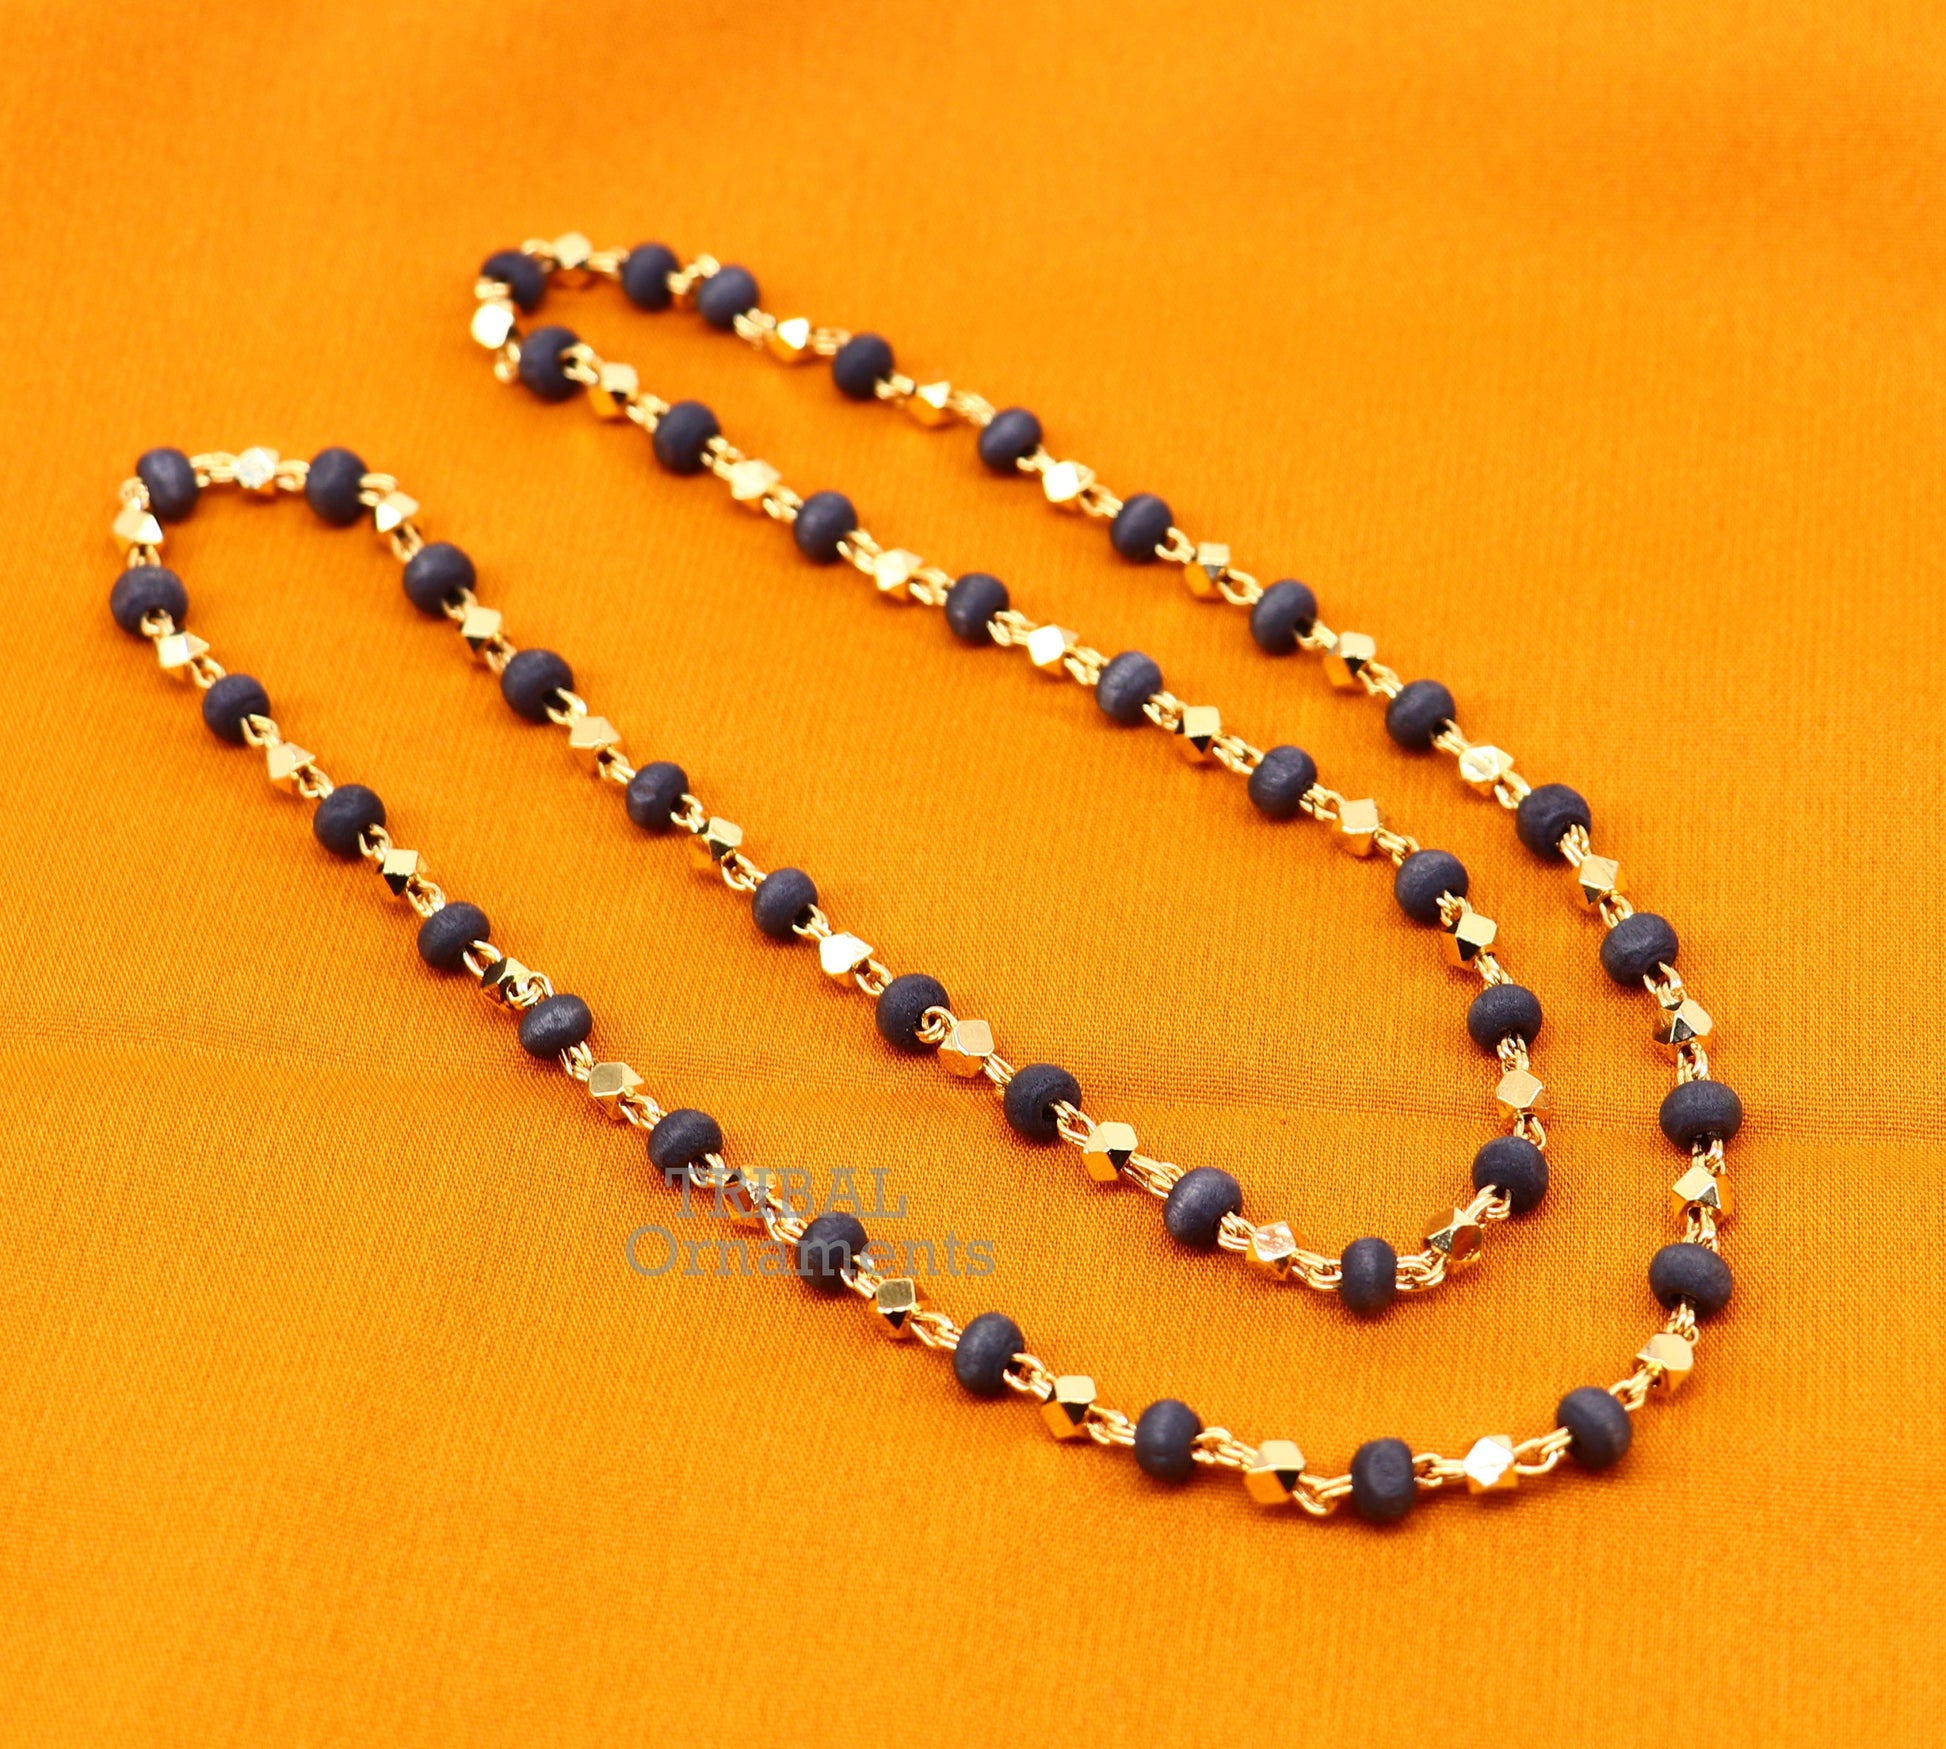 Sterling silver handmade wooden beads basil rosary beads silver chain over gold polished, black tulsi mala customized necklace ch161 - TRIBAL ORNAMENTS